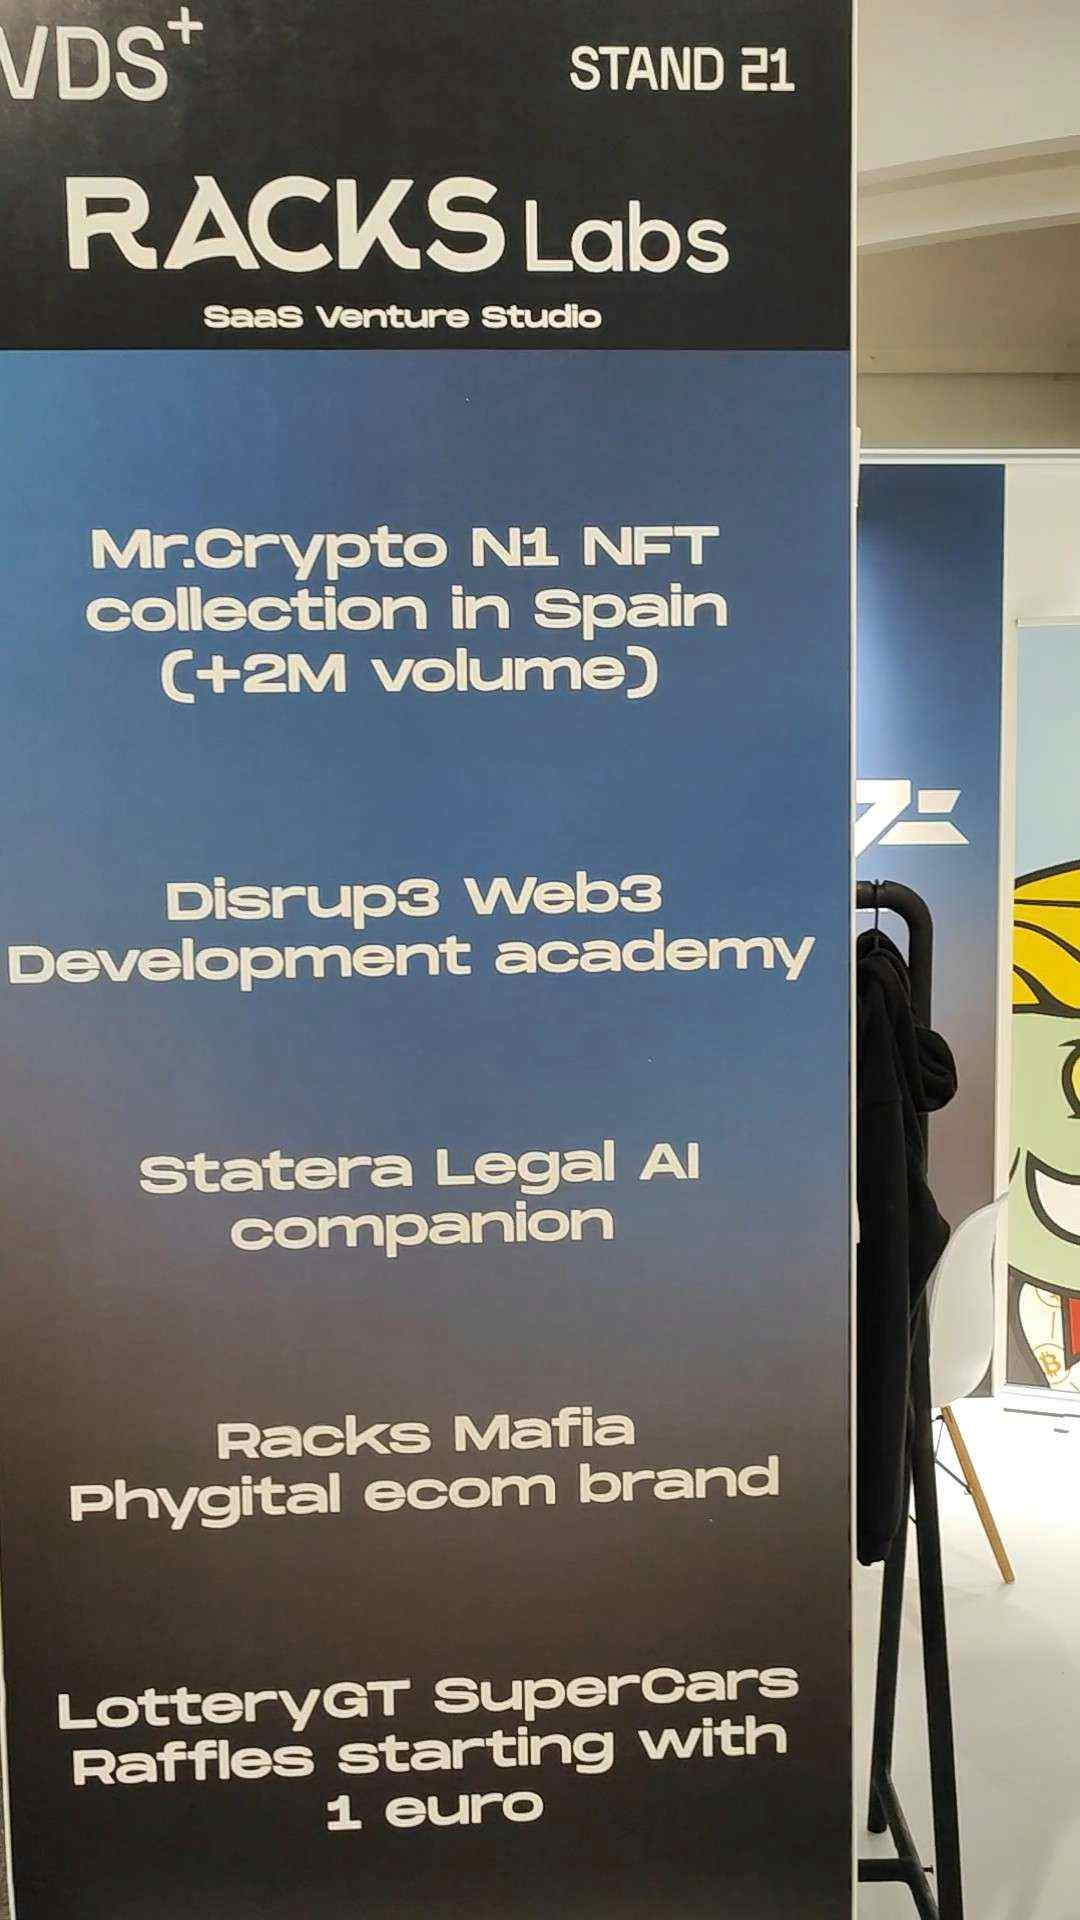 Image from Valencia Digital Summit event